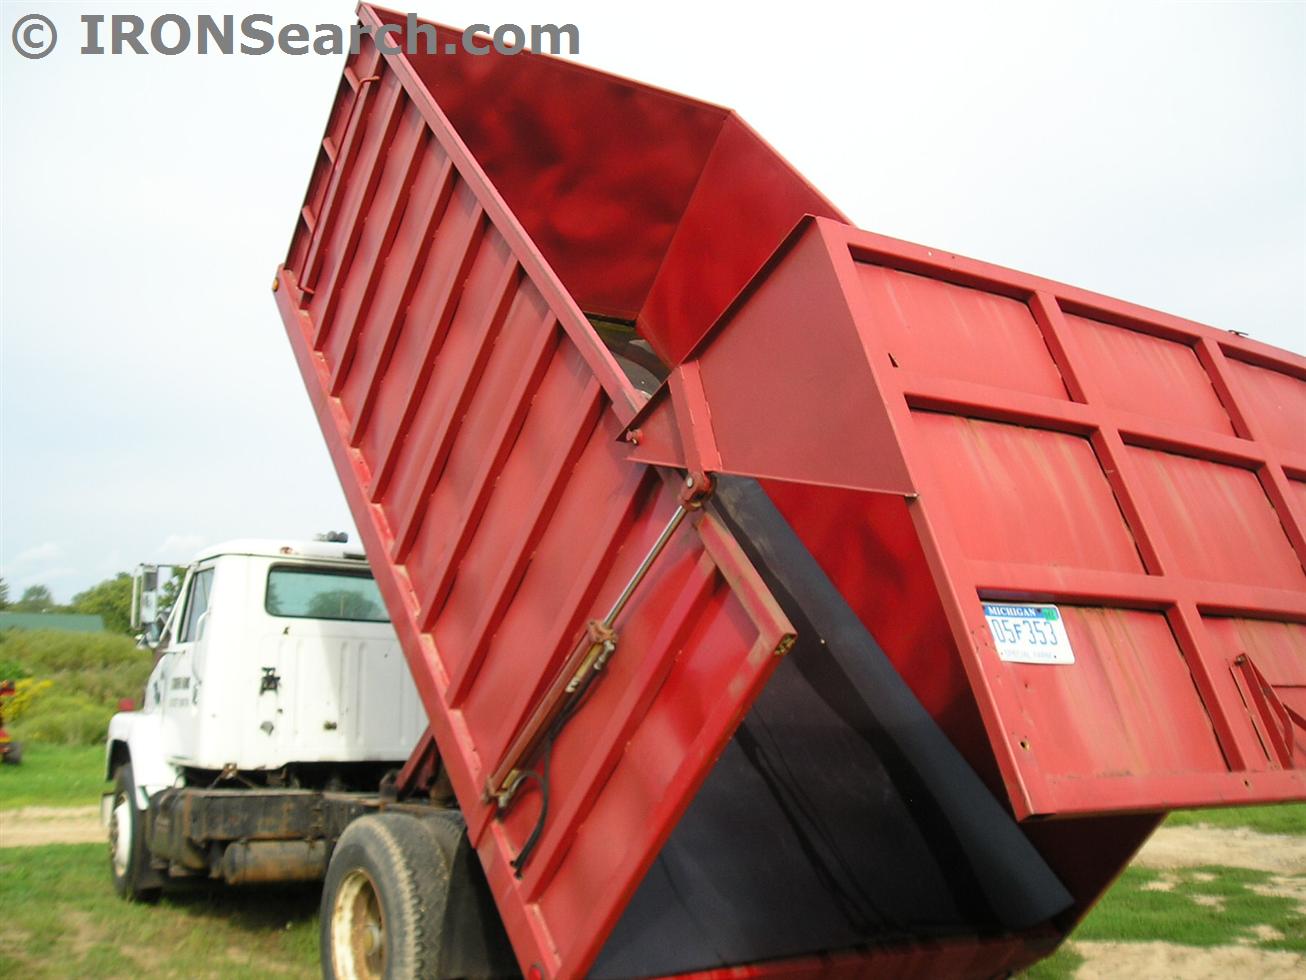 IRON Search - International s2300 Dump Body For Sale By Pells in ...